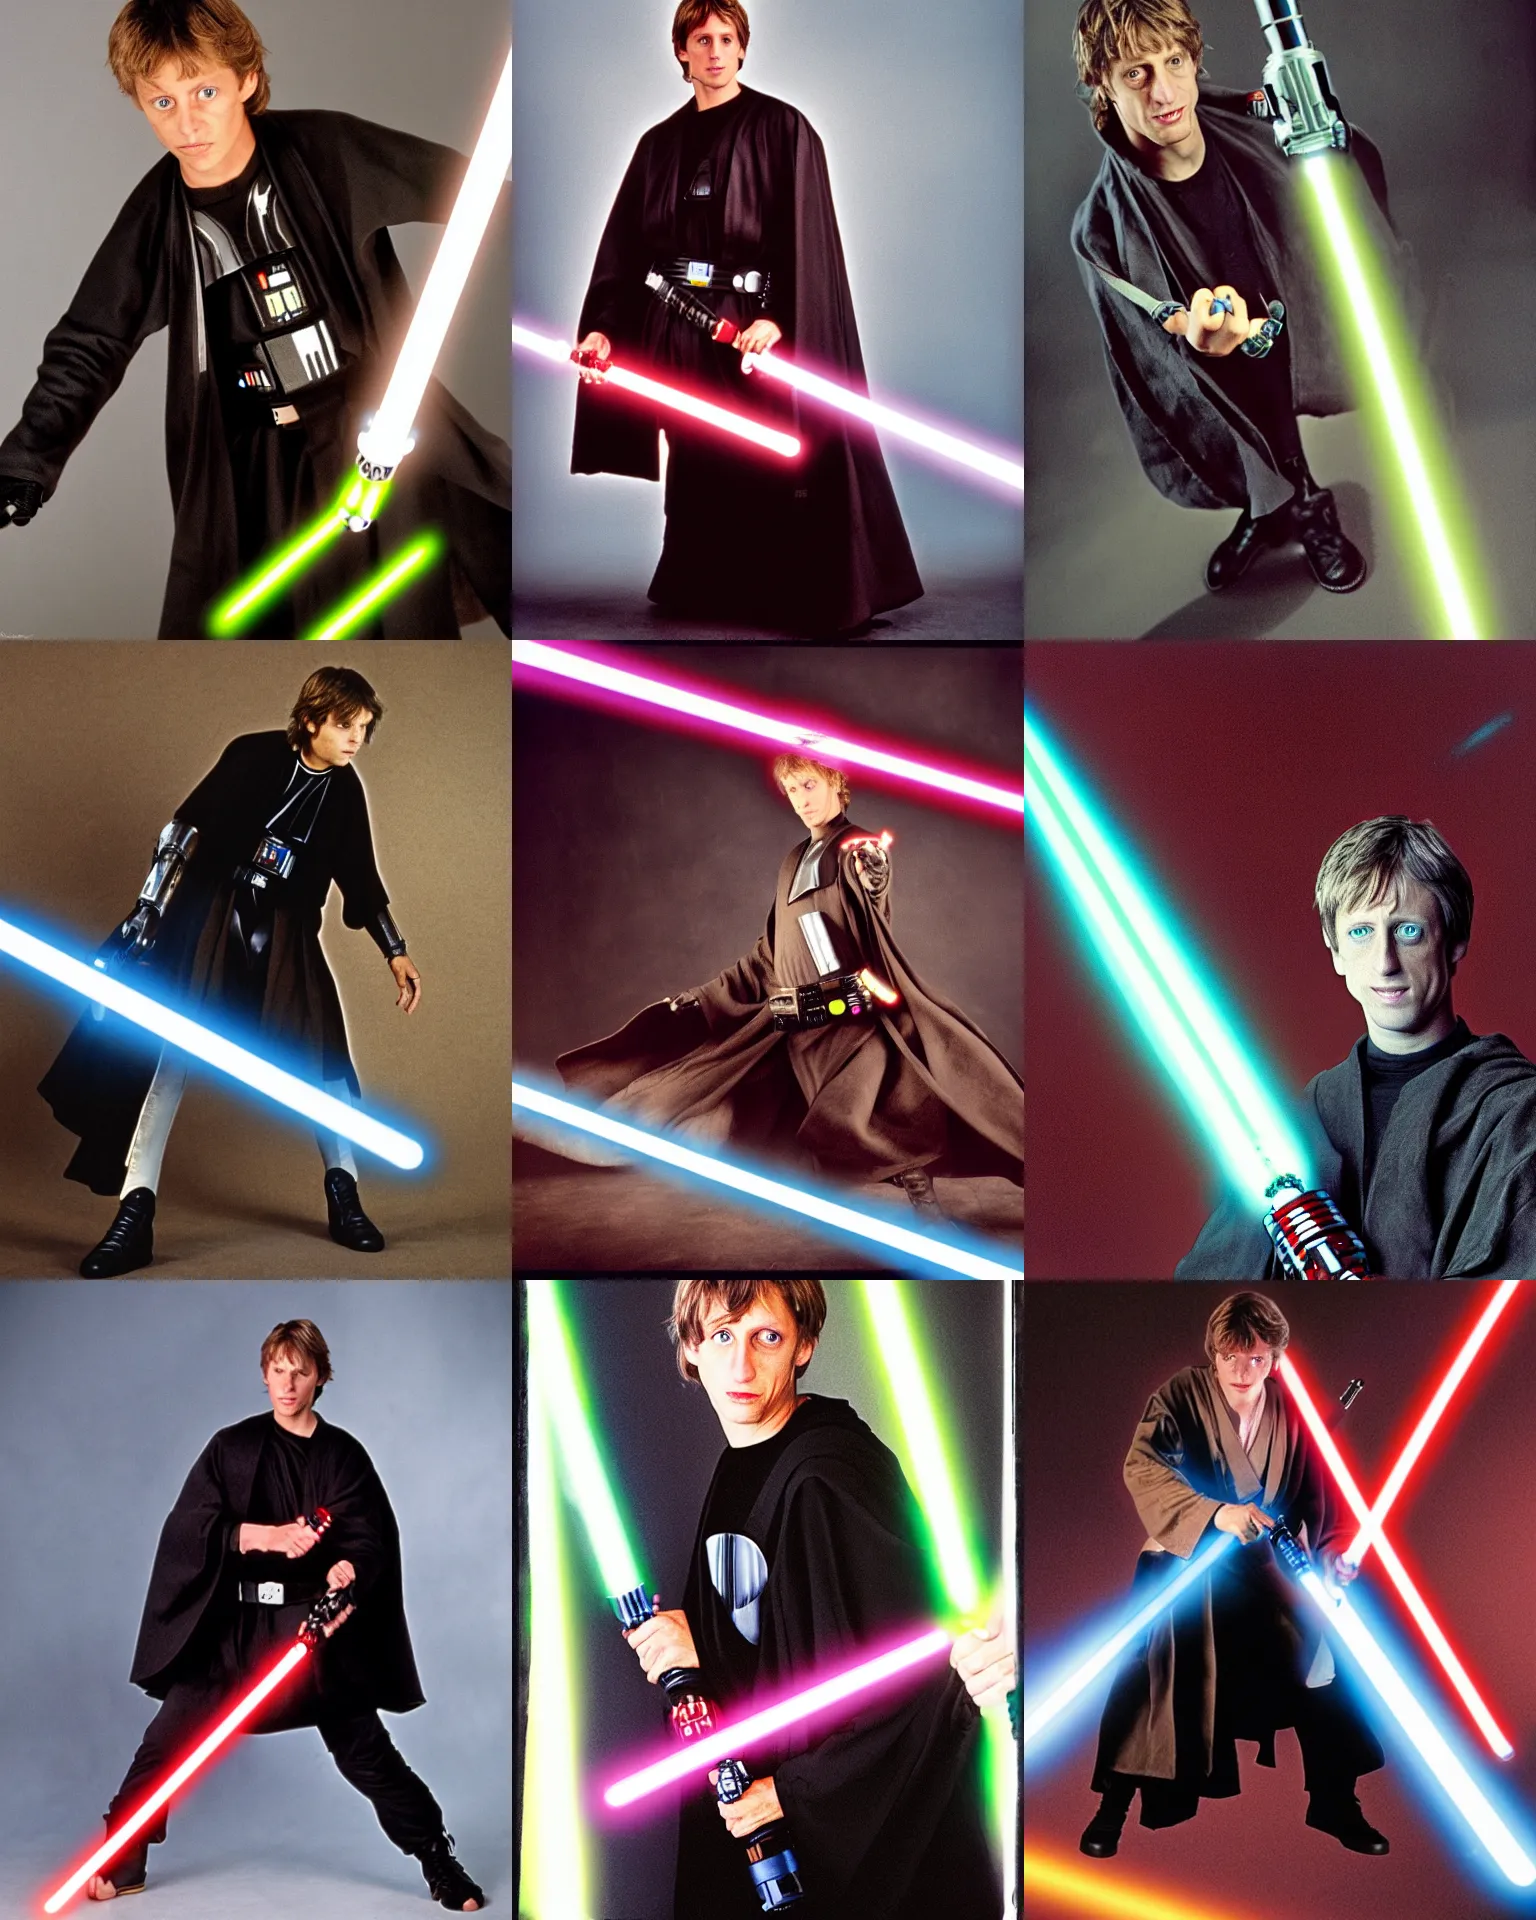 Prompt: Tony Hawk as Anakin Skywalker with lightsaber, 35mm photgraphy